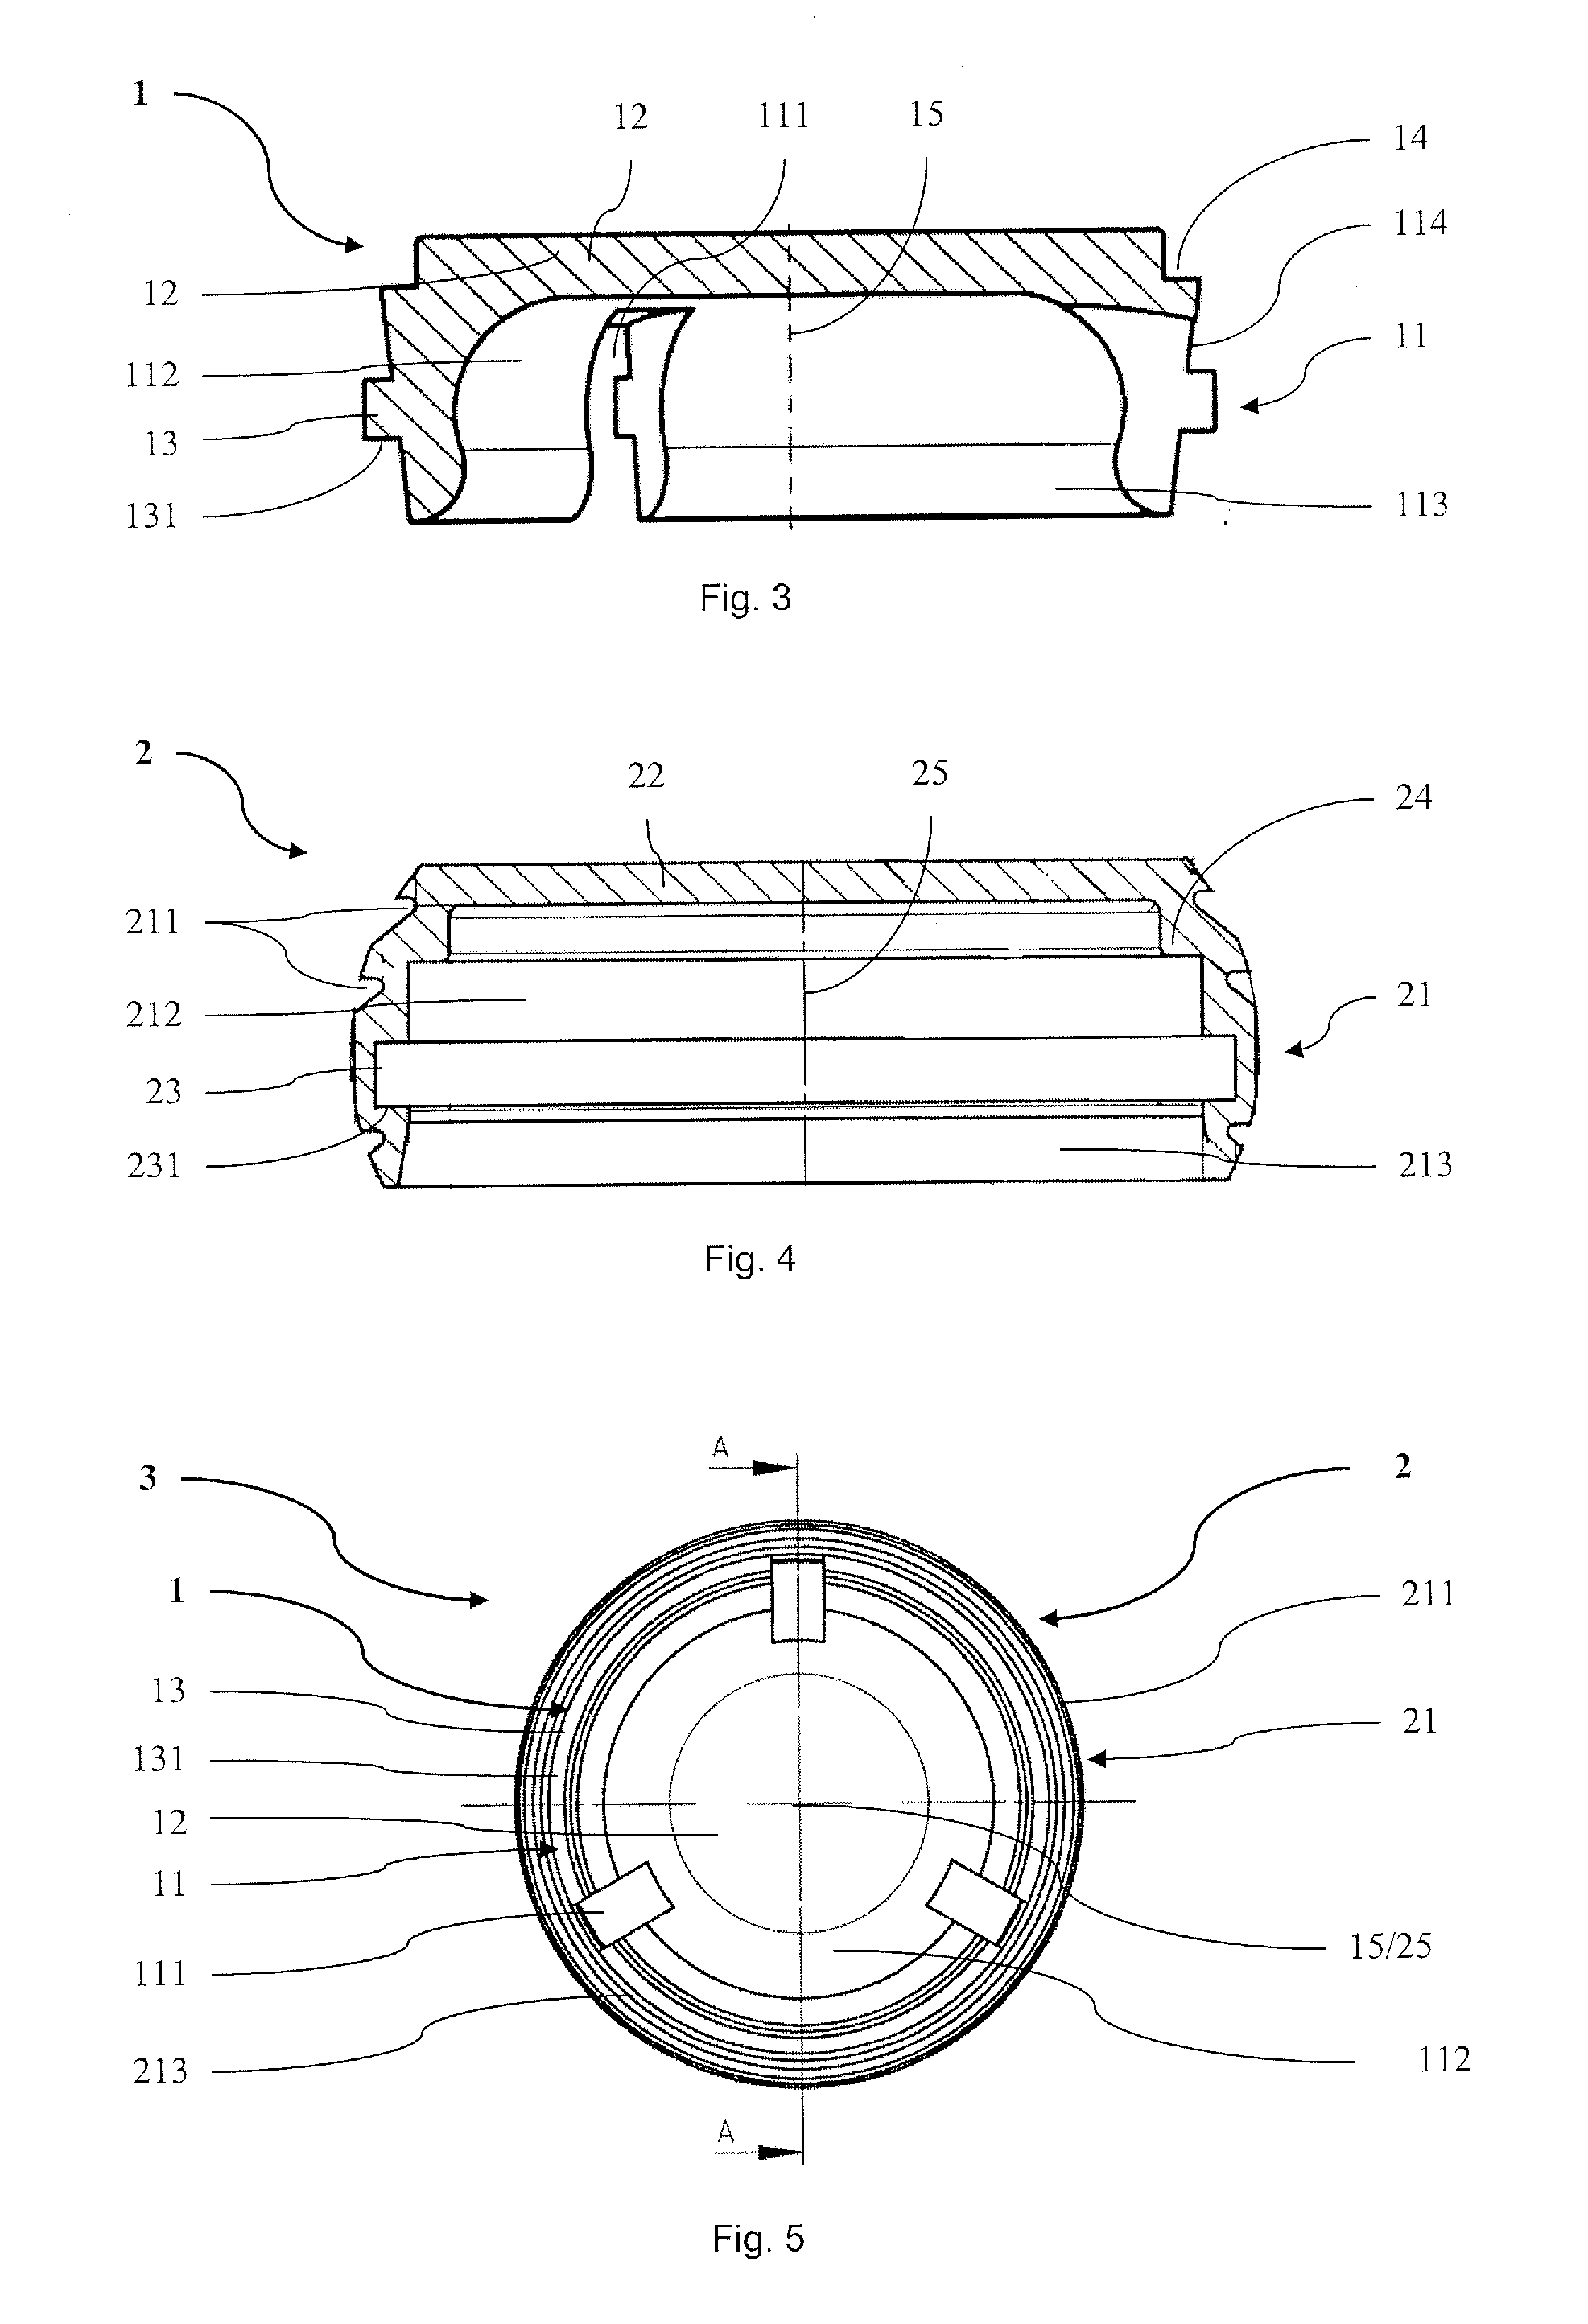 Connection of a prosthesis structure with an implant structure